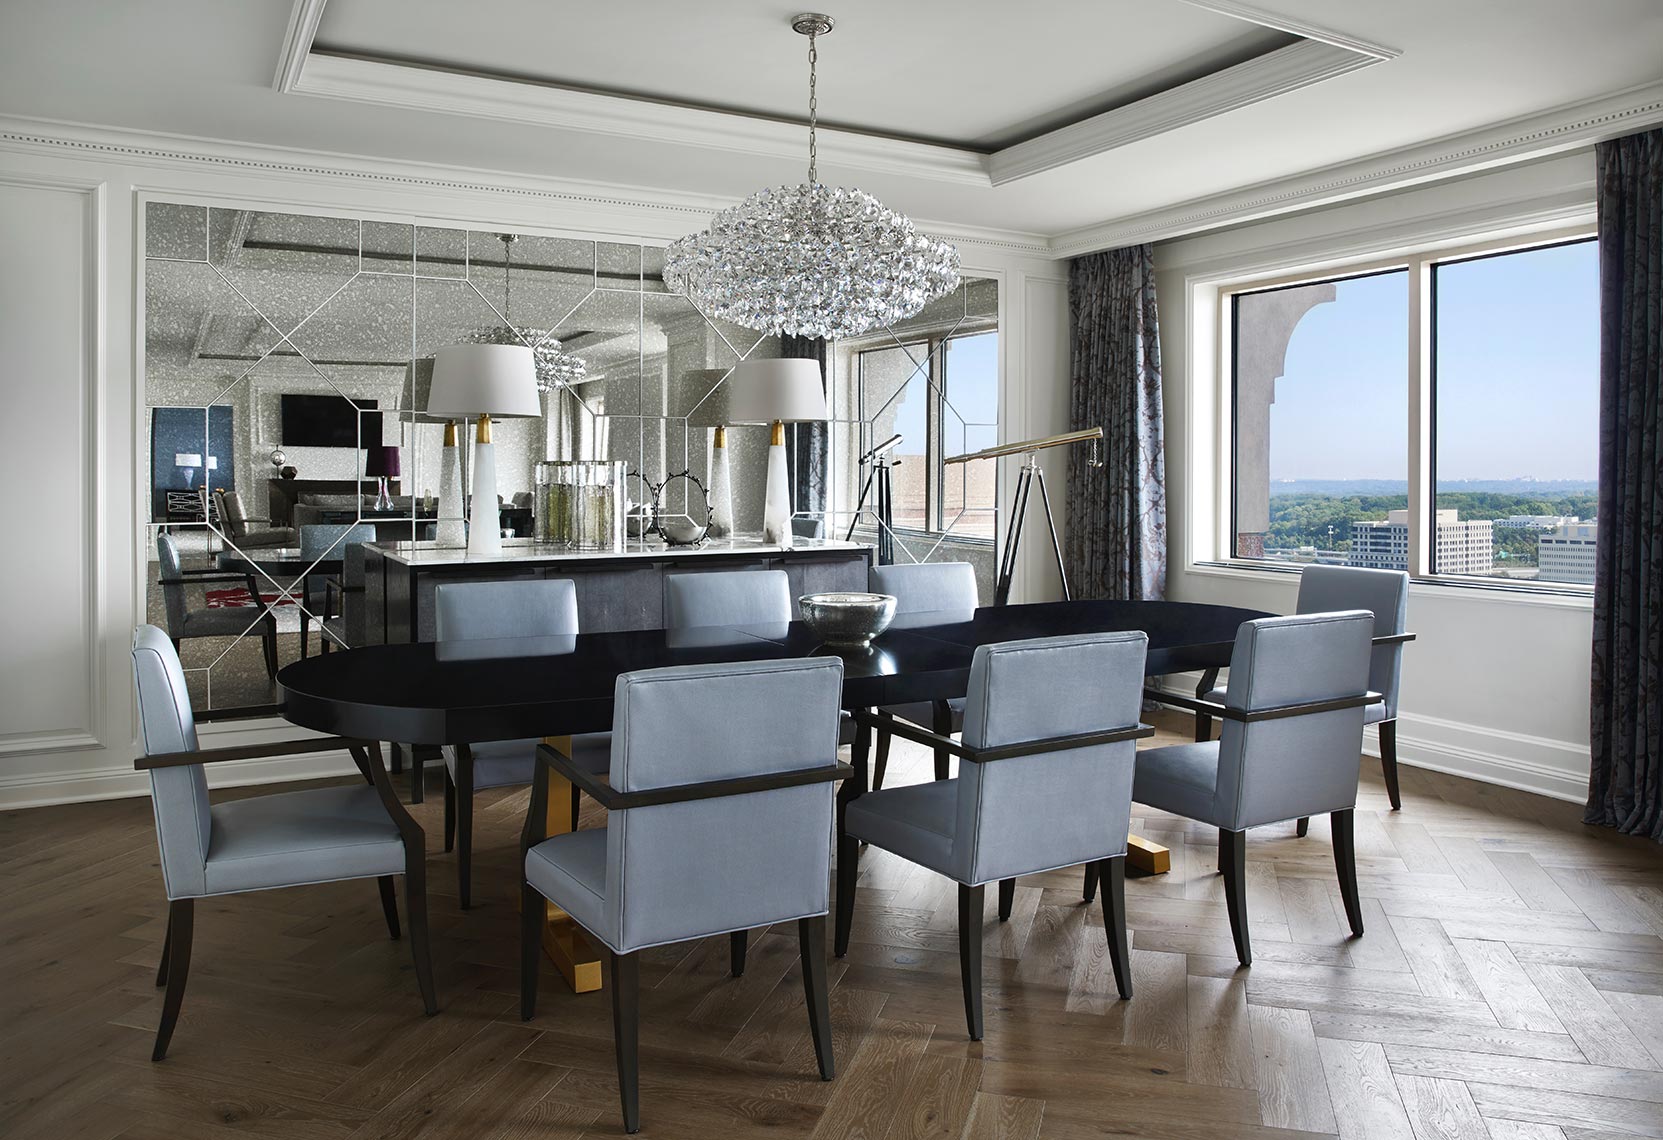 The Ritz-Carlton Tysons - Presidential Suite Dining Area